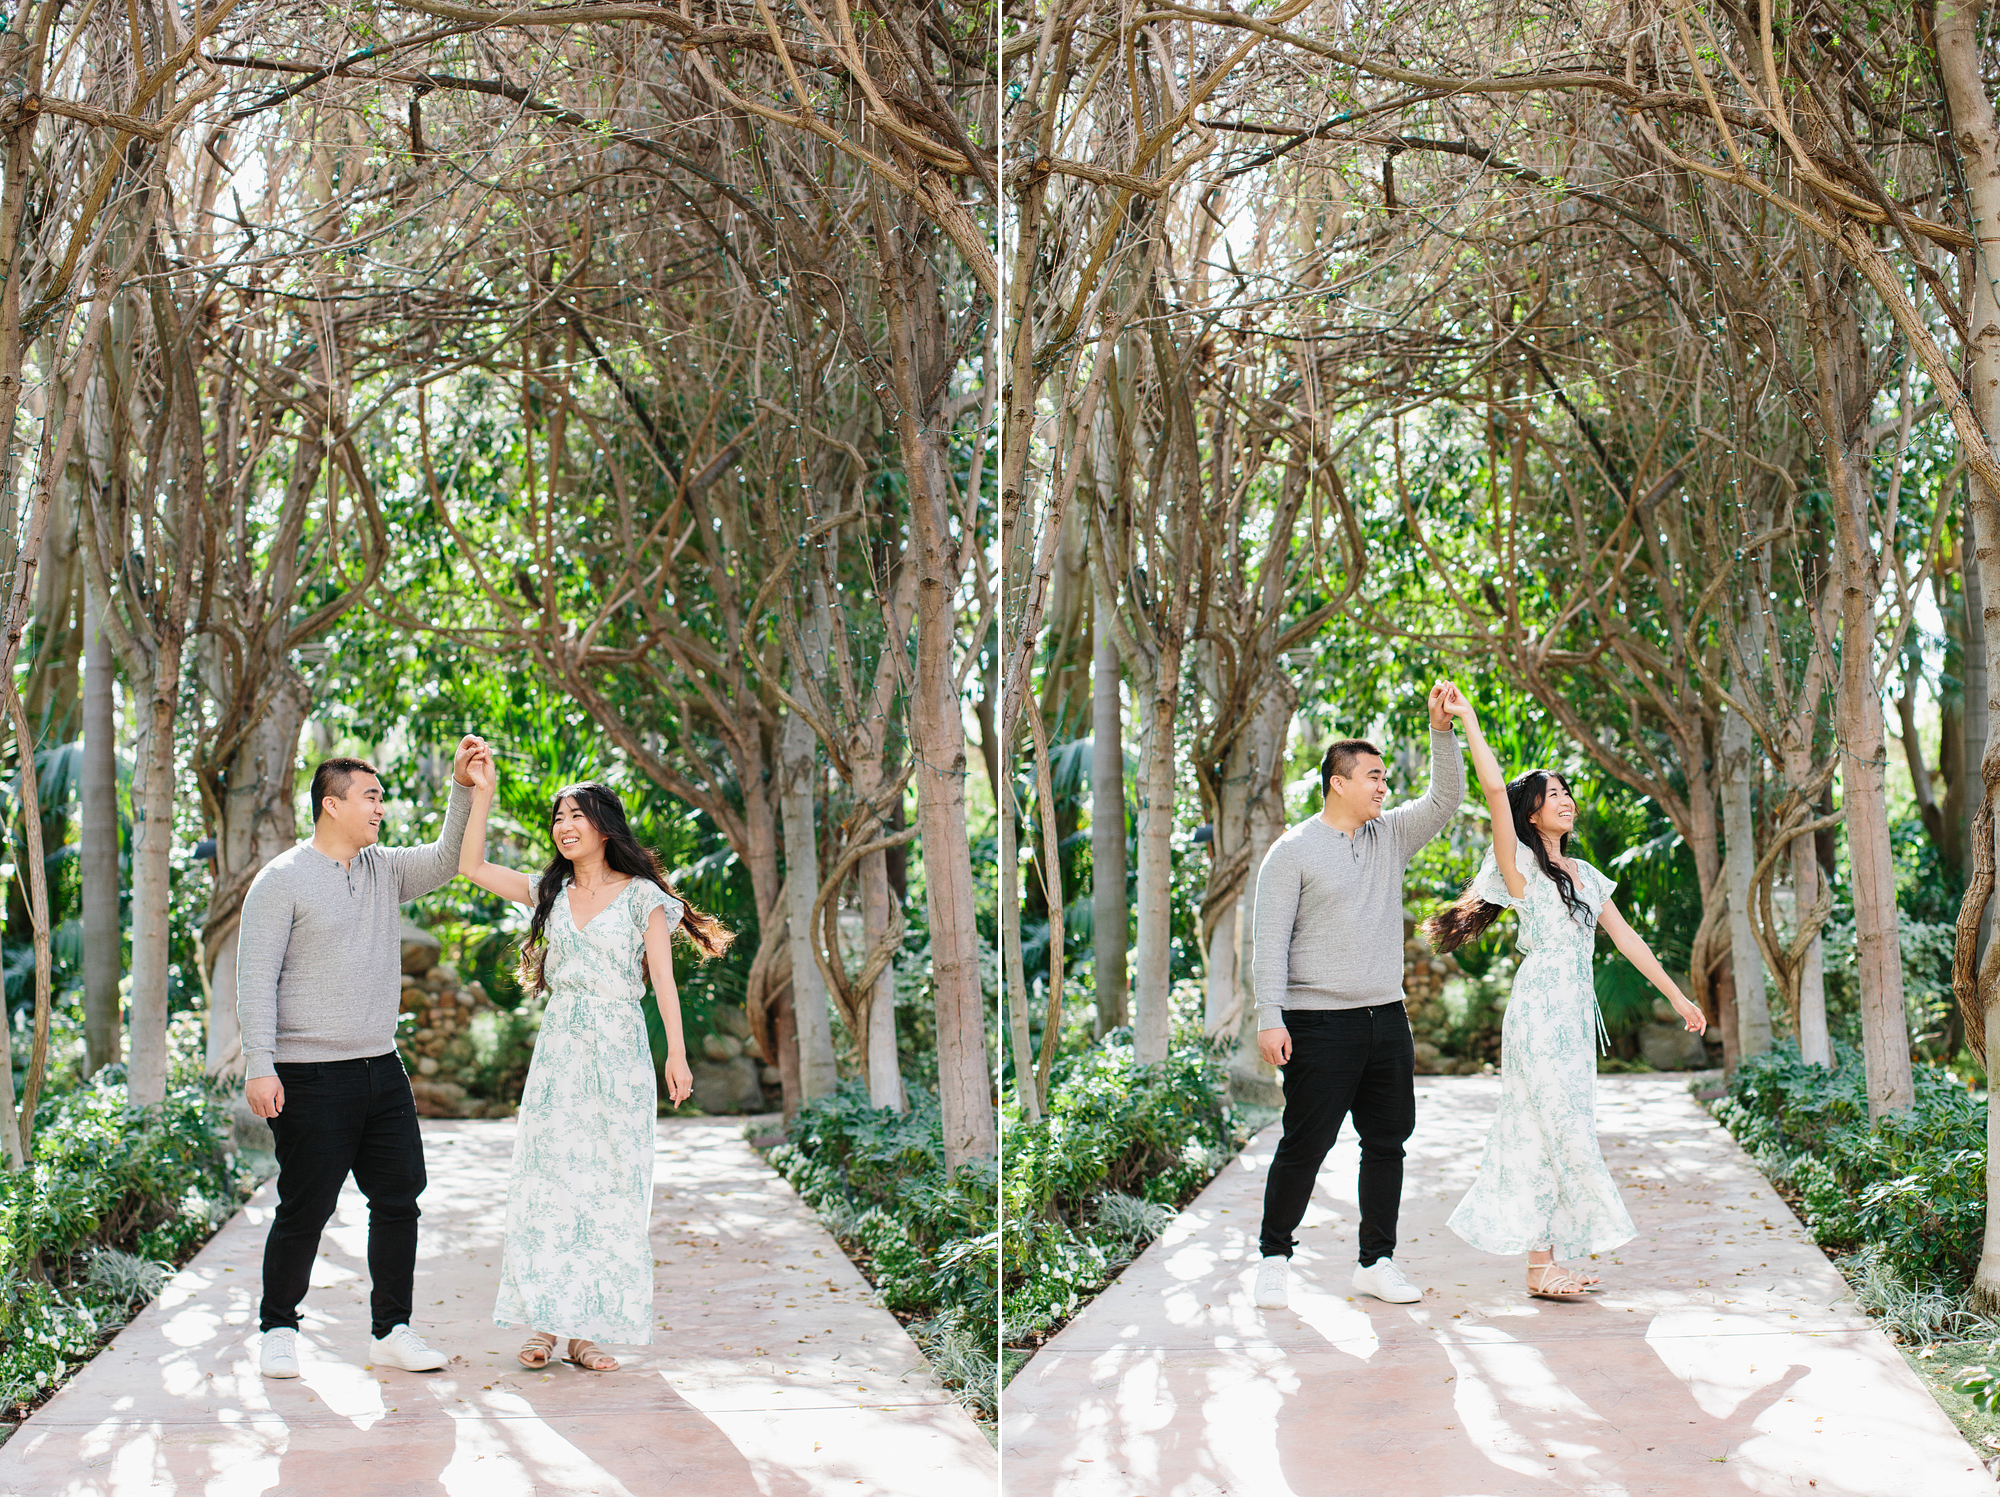 Two photos of groom twirling bride at their engagement session